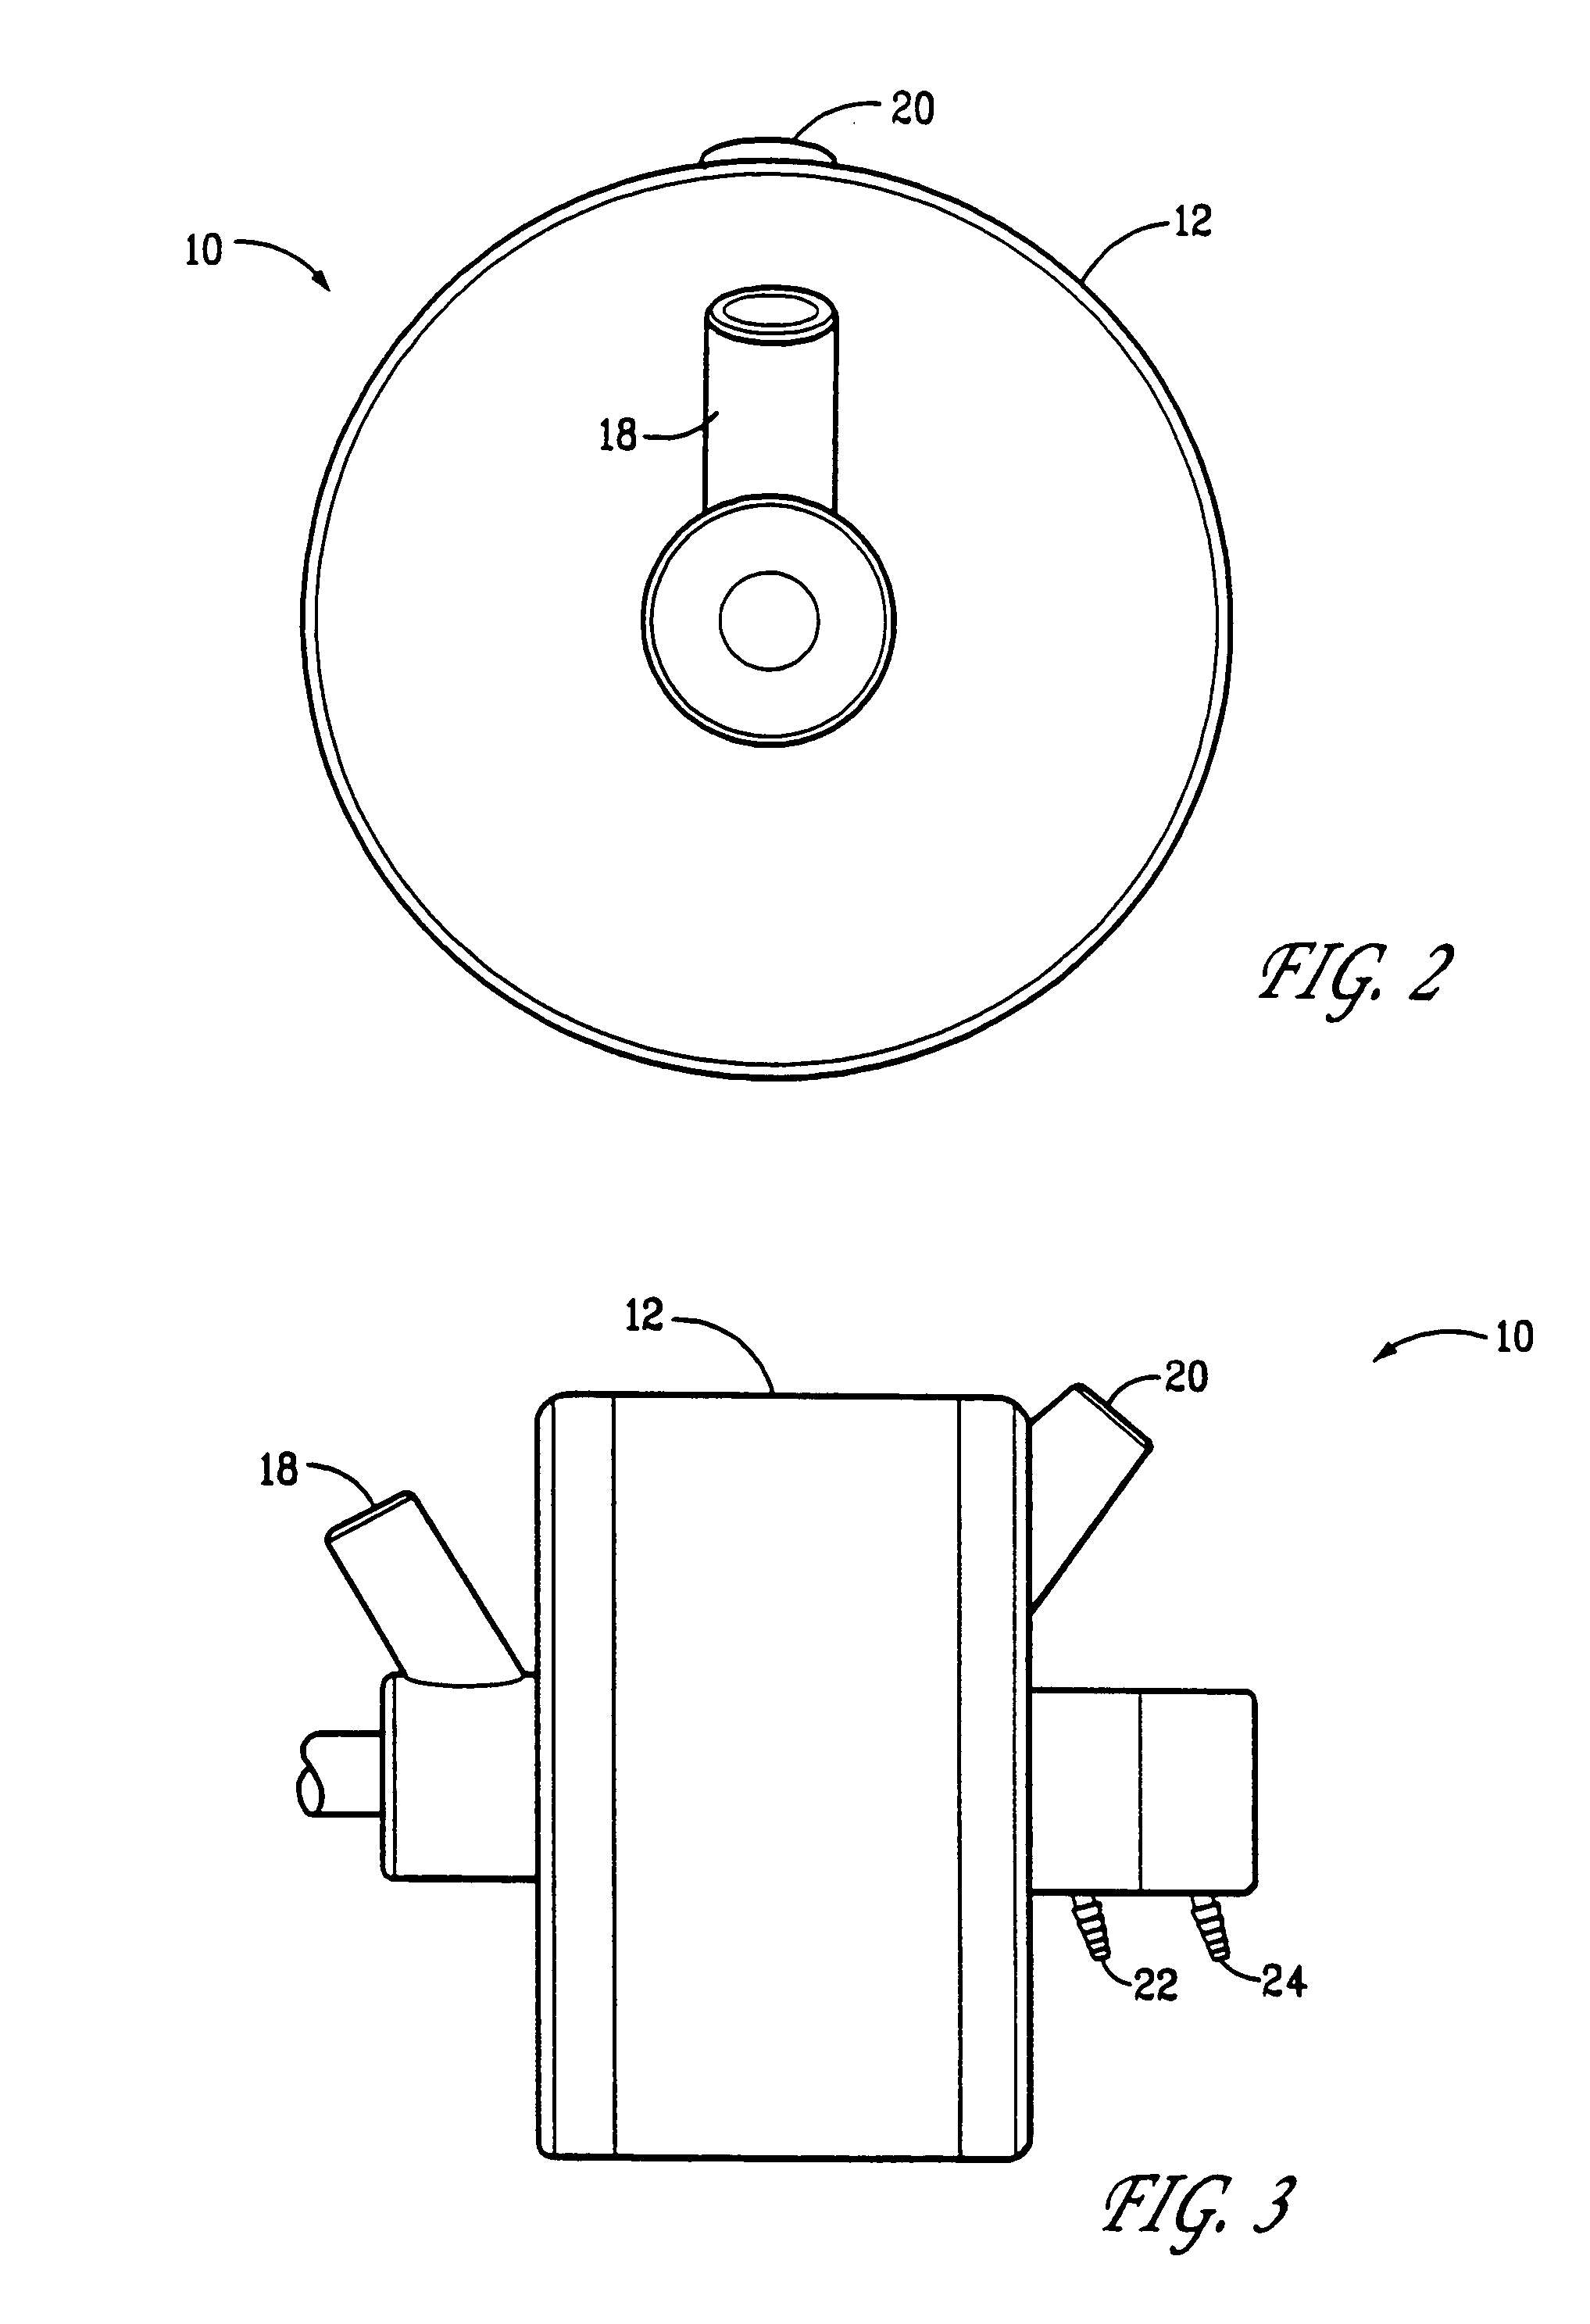 Membrane apparatus with enhanced mass transfer, heat transfer and pumping capabilities via active mixing